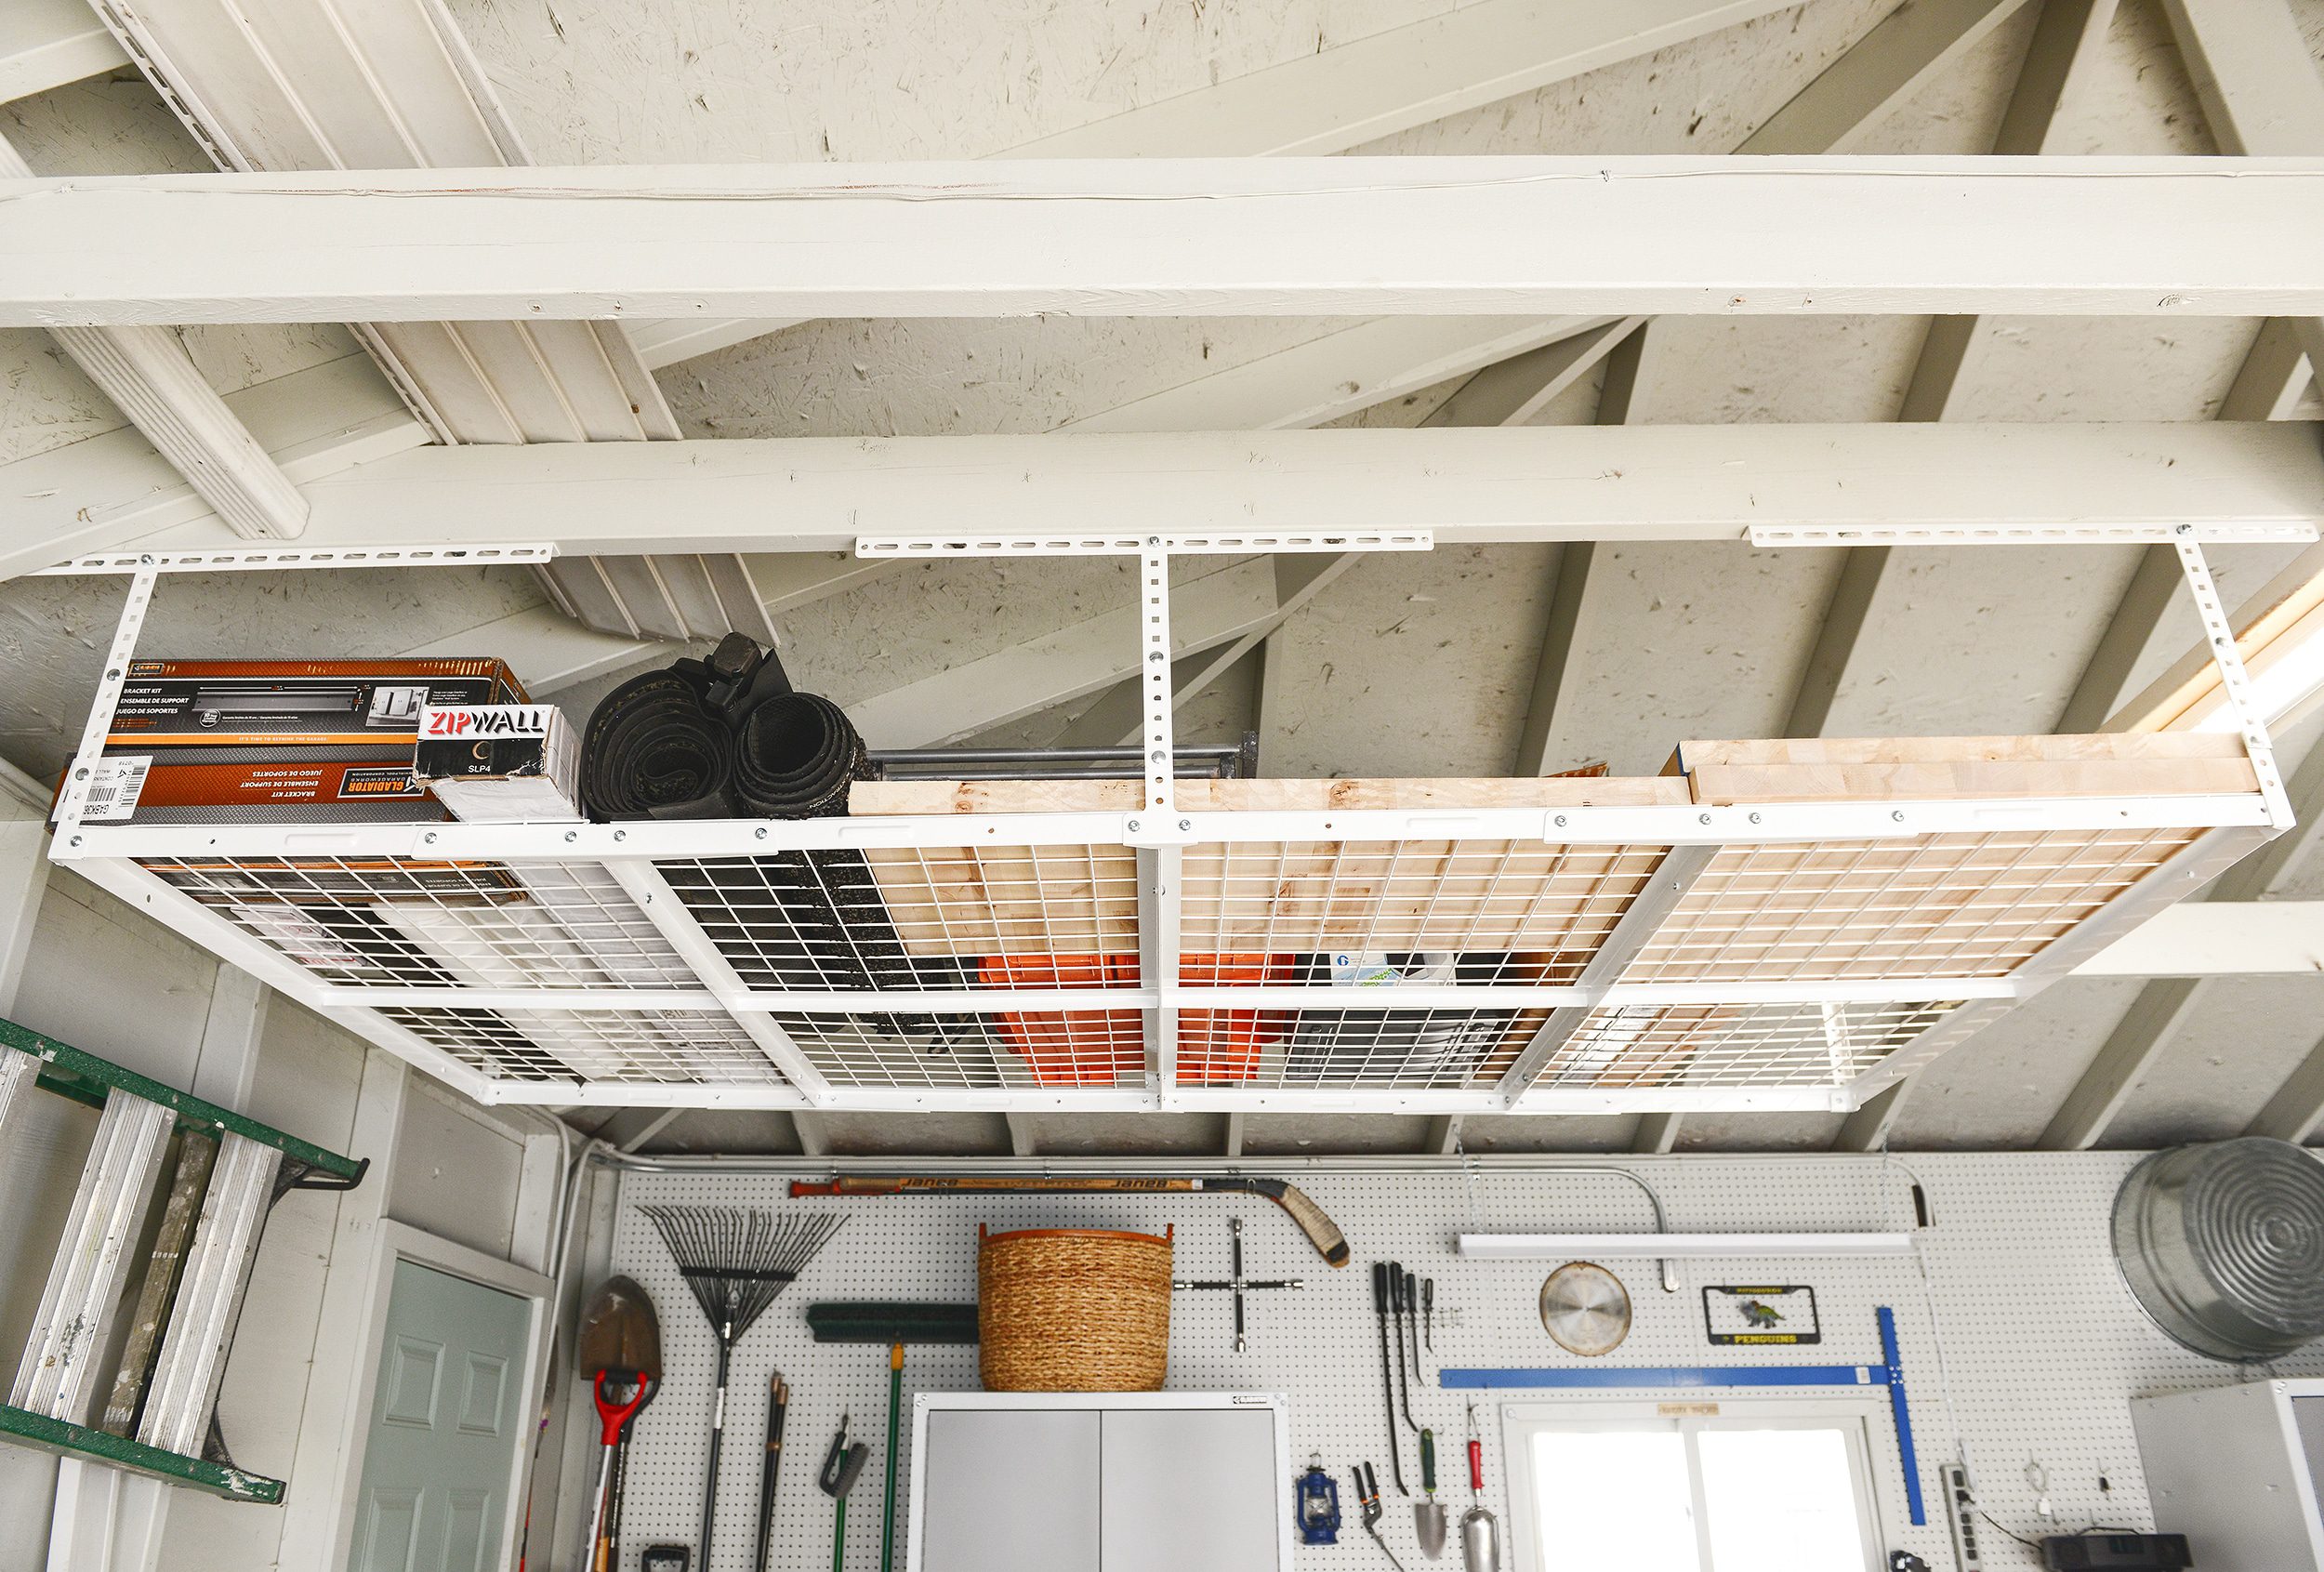 7 Garage Organization Tips Before Winter Hits! via Yellow Brick Home with Lowe's Home Improvement #lowespartner